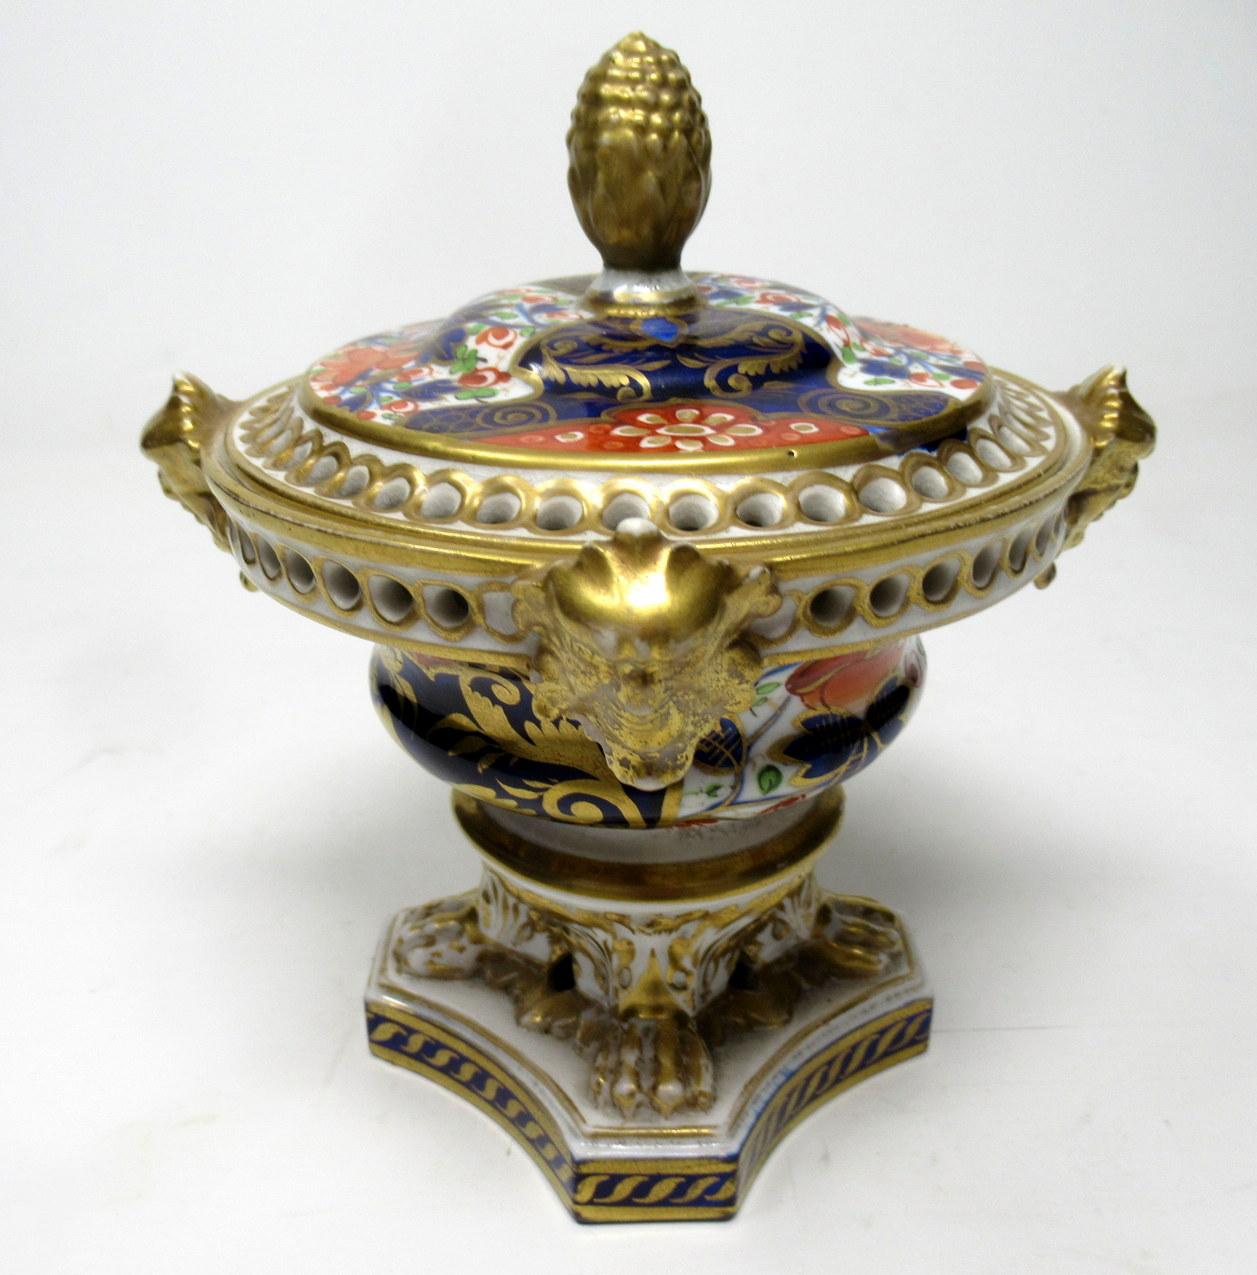 Wonderful rare matched pair of early English Regency Royal Crown Derby Porcelain Pot Pourri or Pastile Burners of traditional form. First quarter of the Nineteenth century. 

Lavishly hand decorated in Imari palette with colours of iron red and